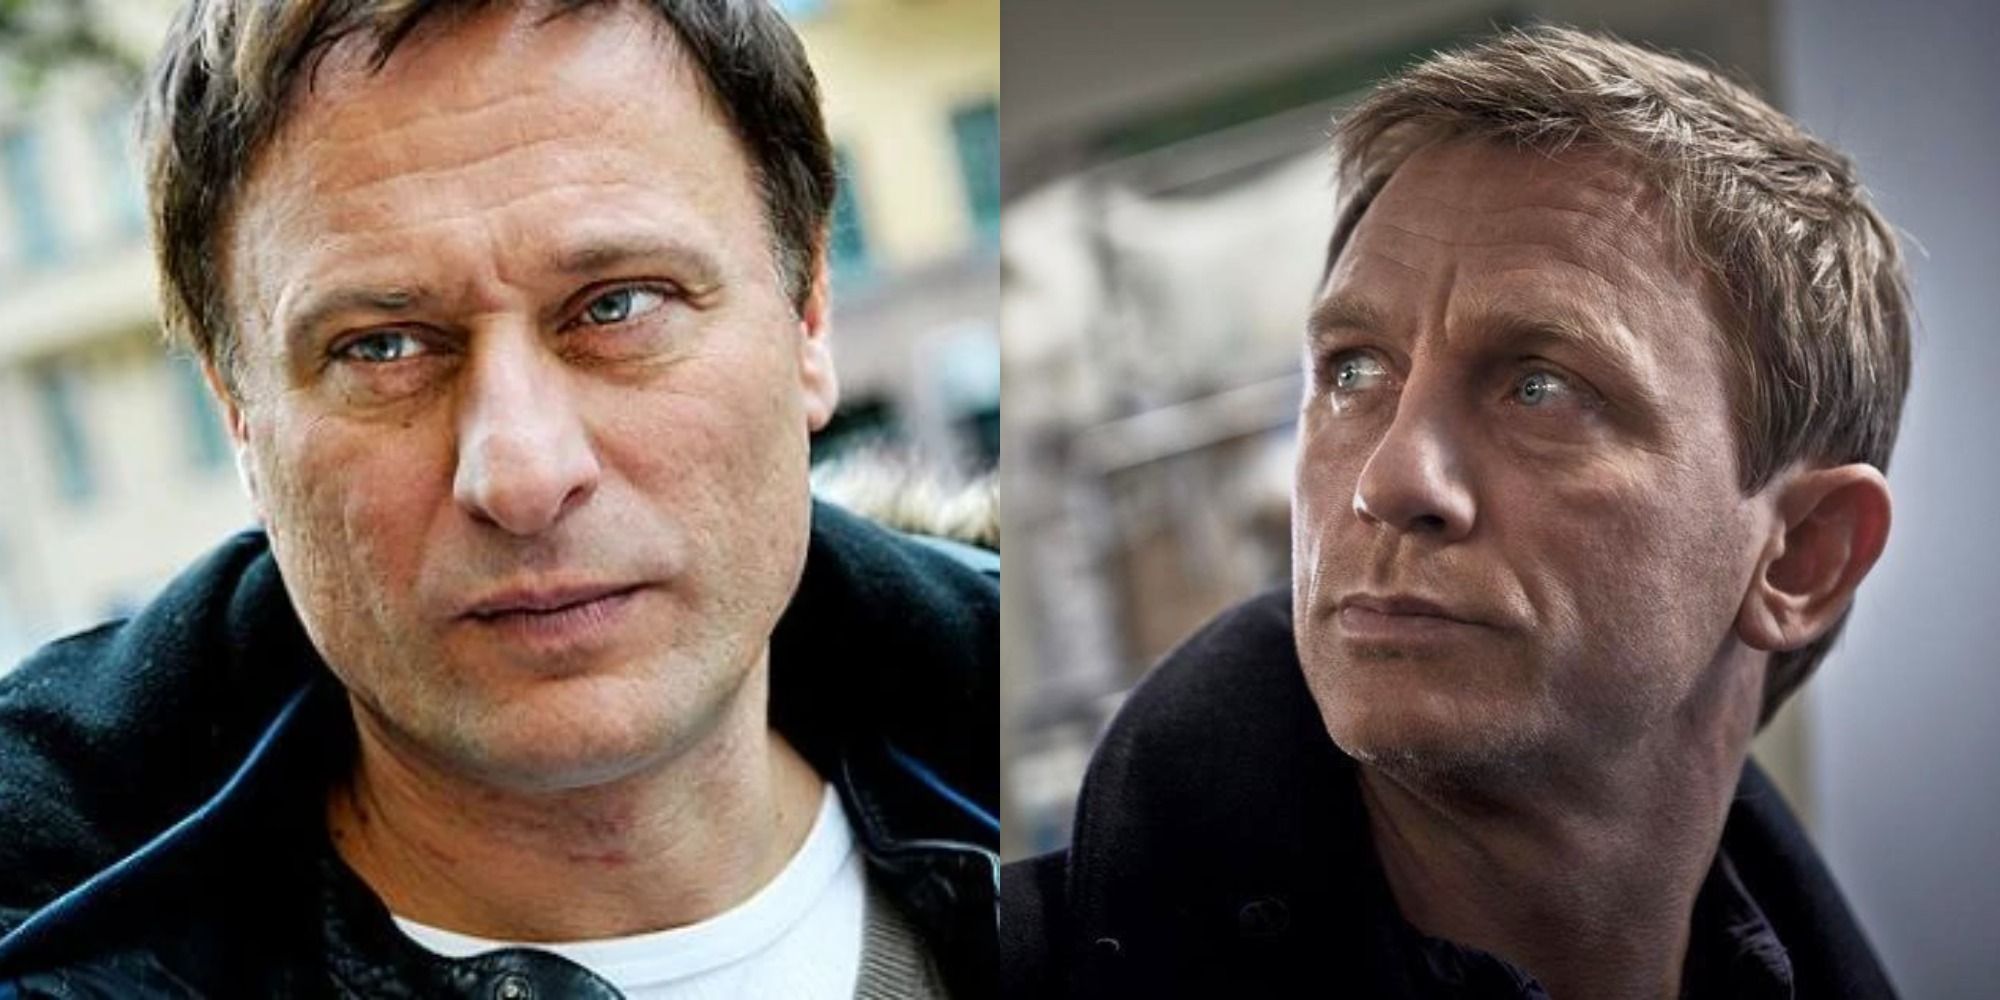 The Girl With The Dragon Tattoo 8 Differences Between The Swedish Original & The American Remake